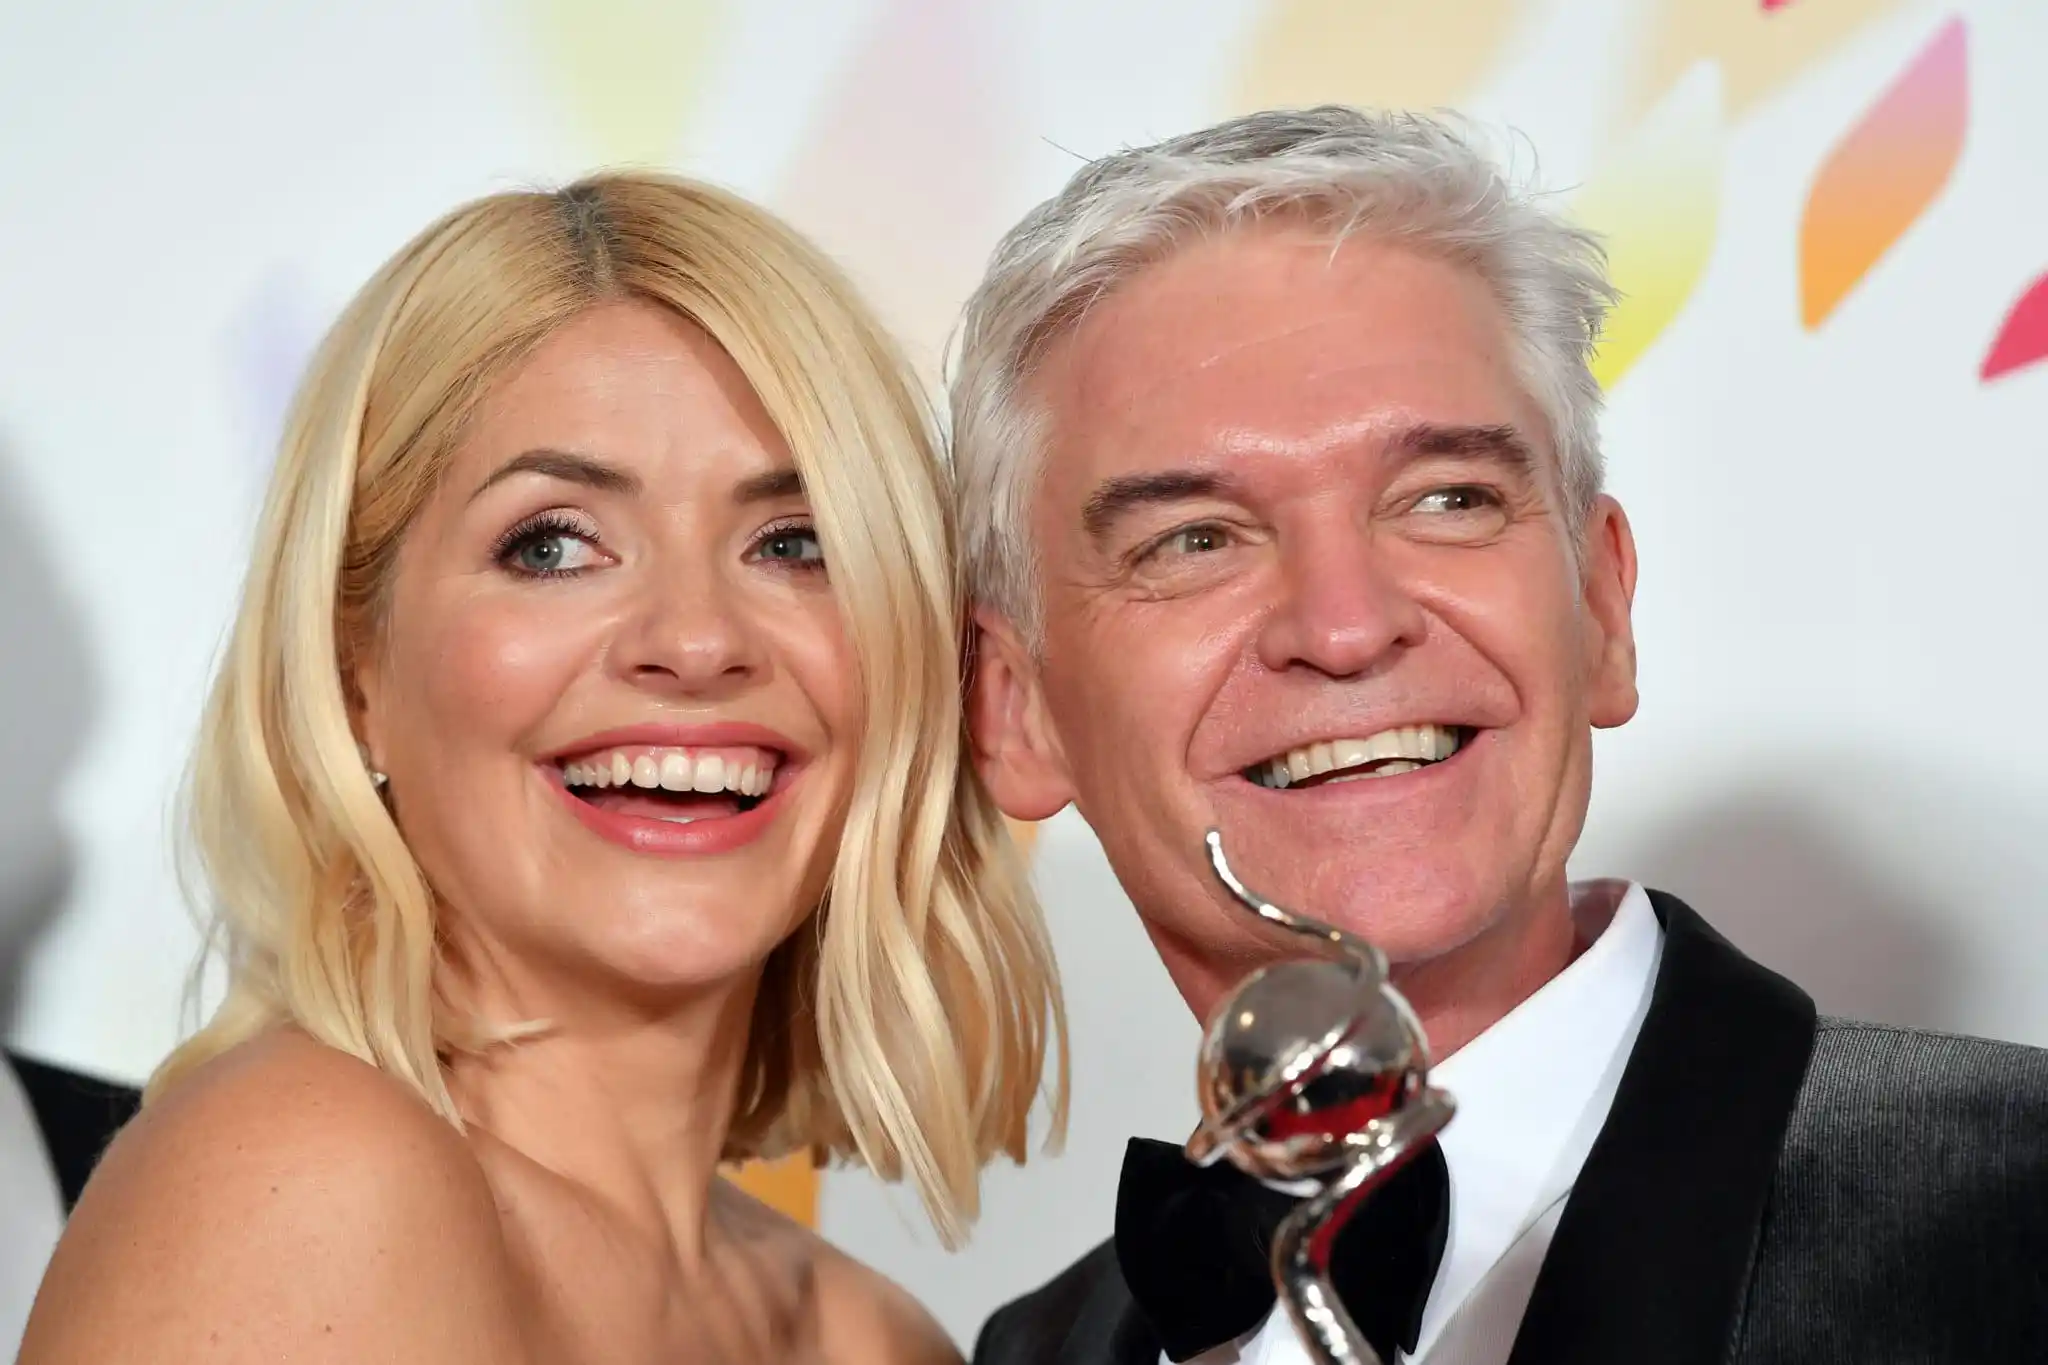 Holly Willoughby and Phillip Schofield pose with an award at the National Television Awards 2020 